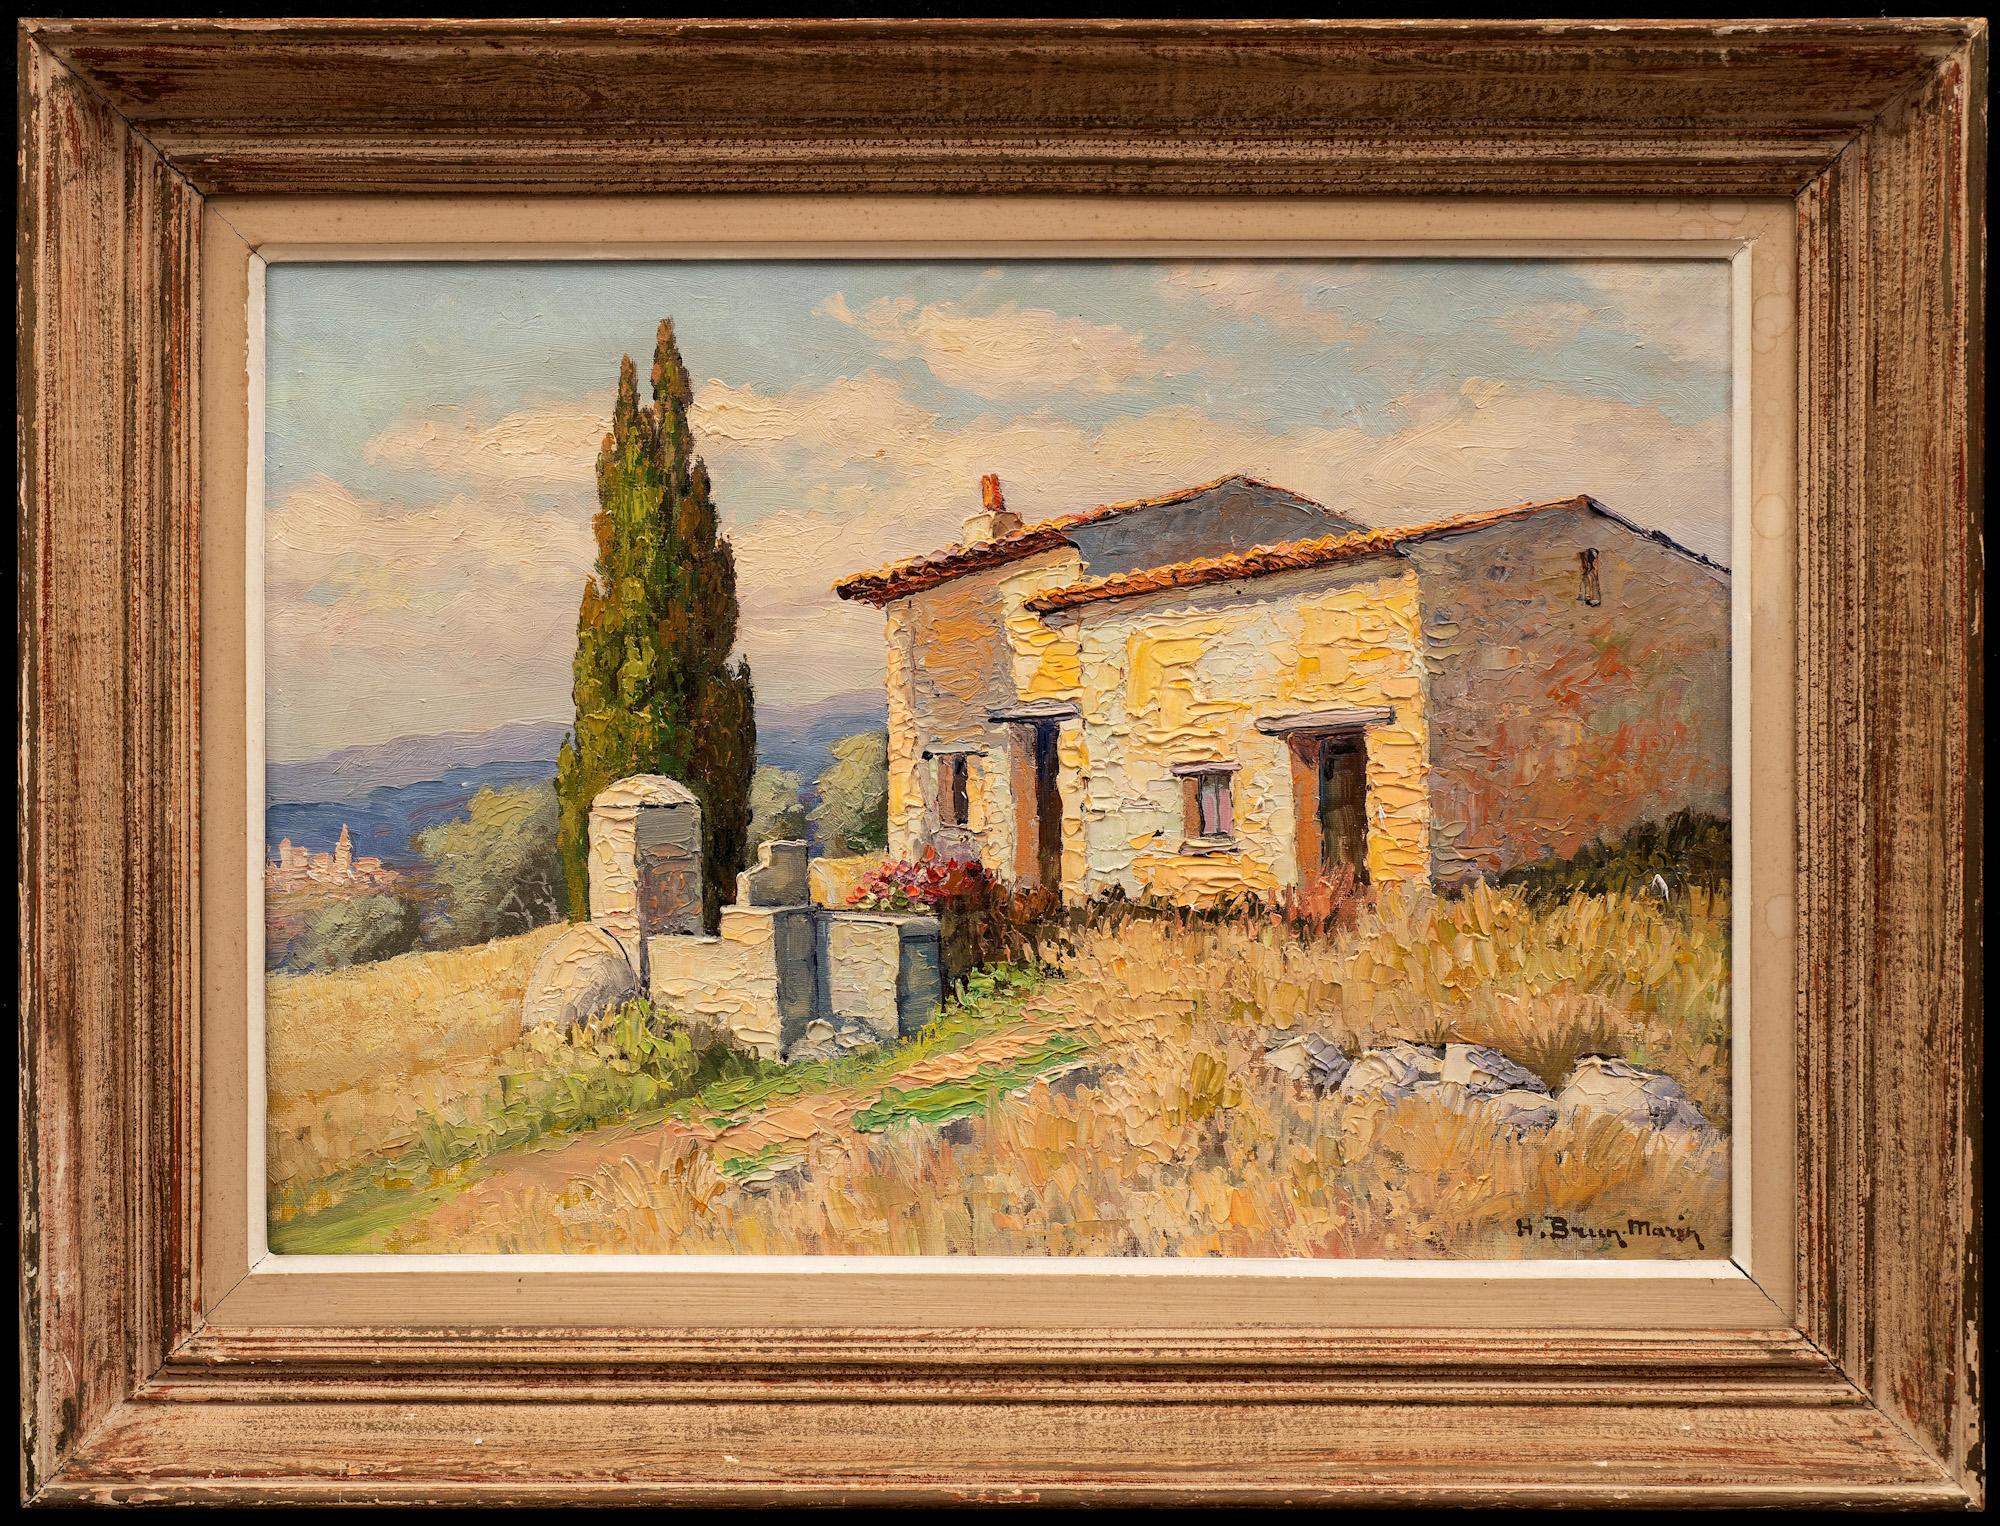 "Provençal Landscape with Cypress Trees In Summer" 
Henri Brun-Marin ca. 1930s
Oil on canvas, signed lower right
(21 x 14 1/4 27 1/2 20 3/4 frame)

Charming mid-20th century painting, oil on canvas signed lower right "H. Brun-Marin," representing an